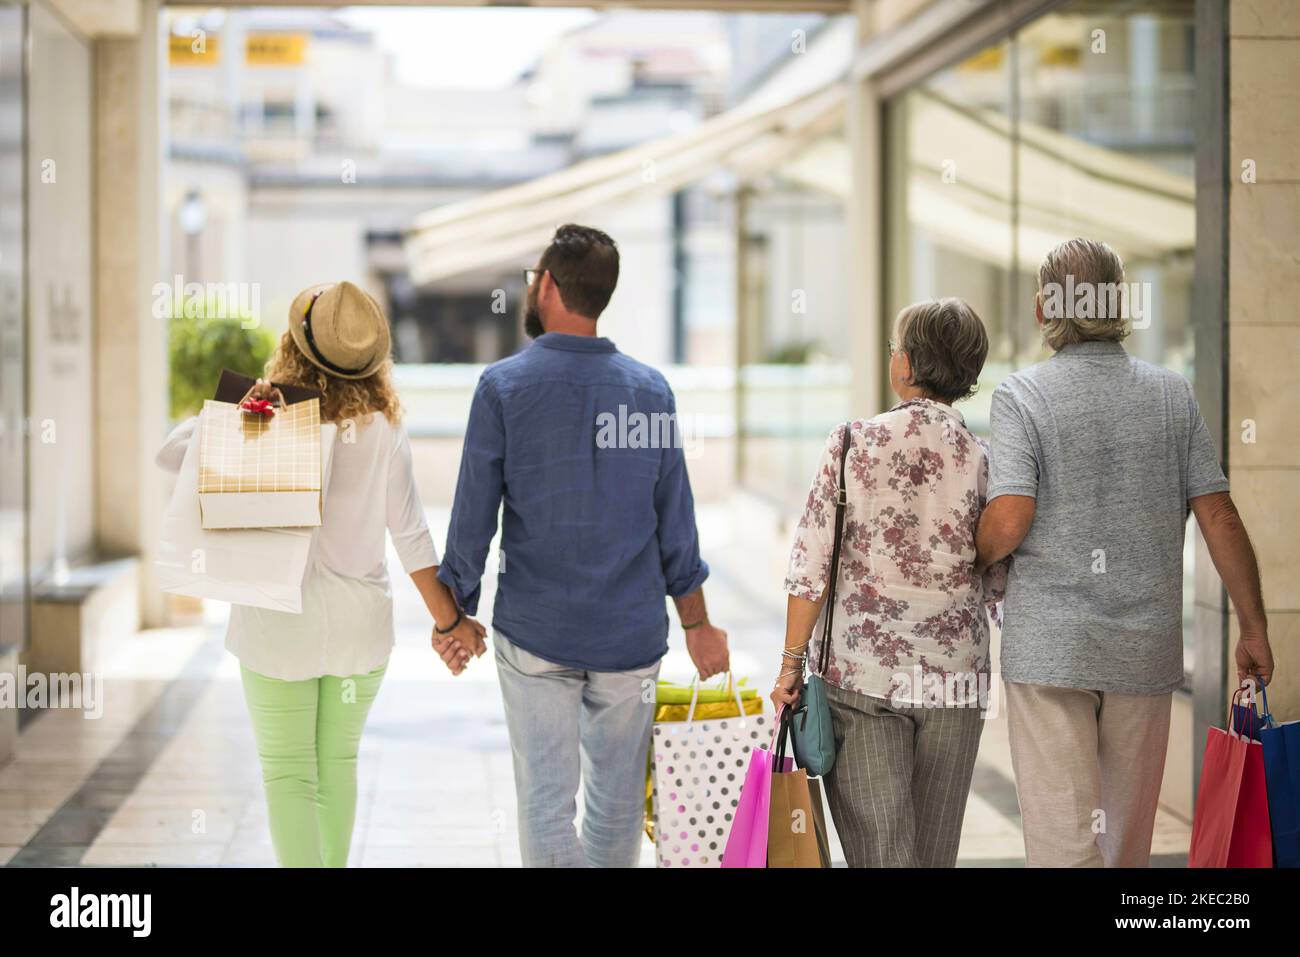 group or family walking together in a mall doing shopping and holding shopping bags - adults and seniors looking at the shops or stores Stock Photo